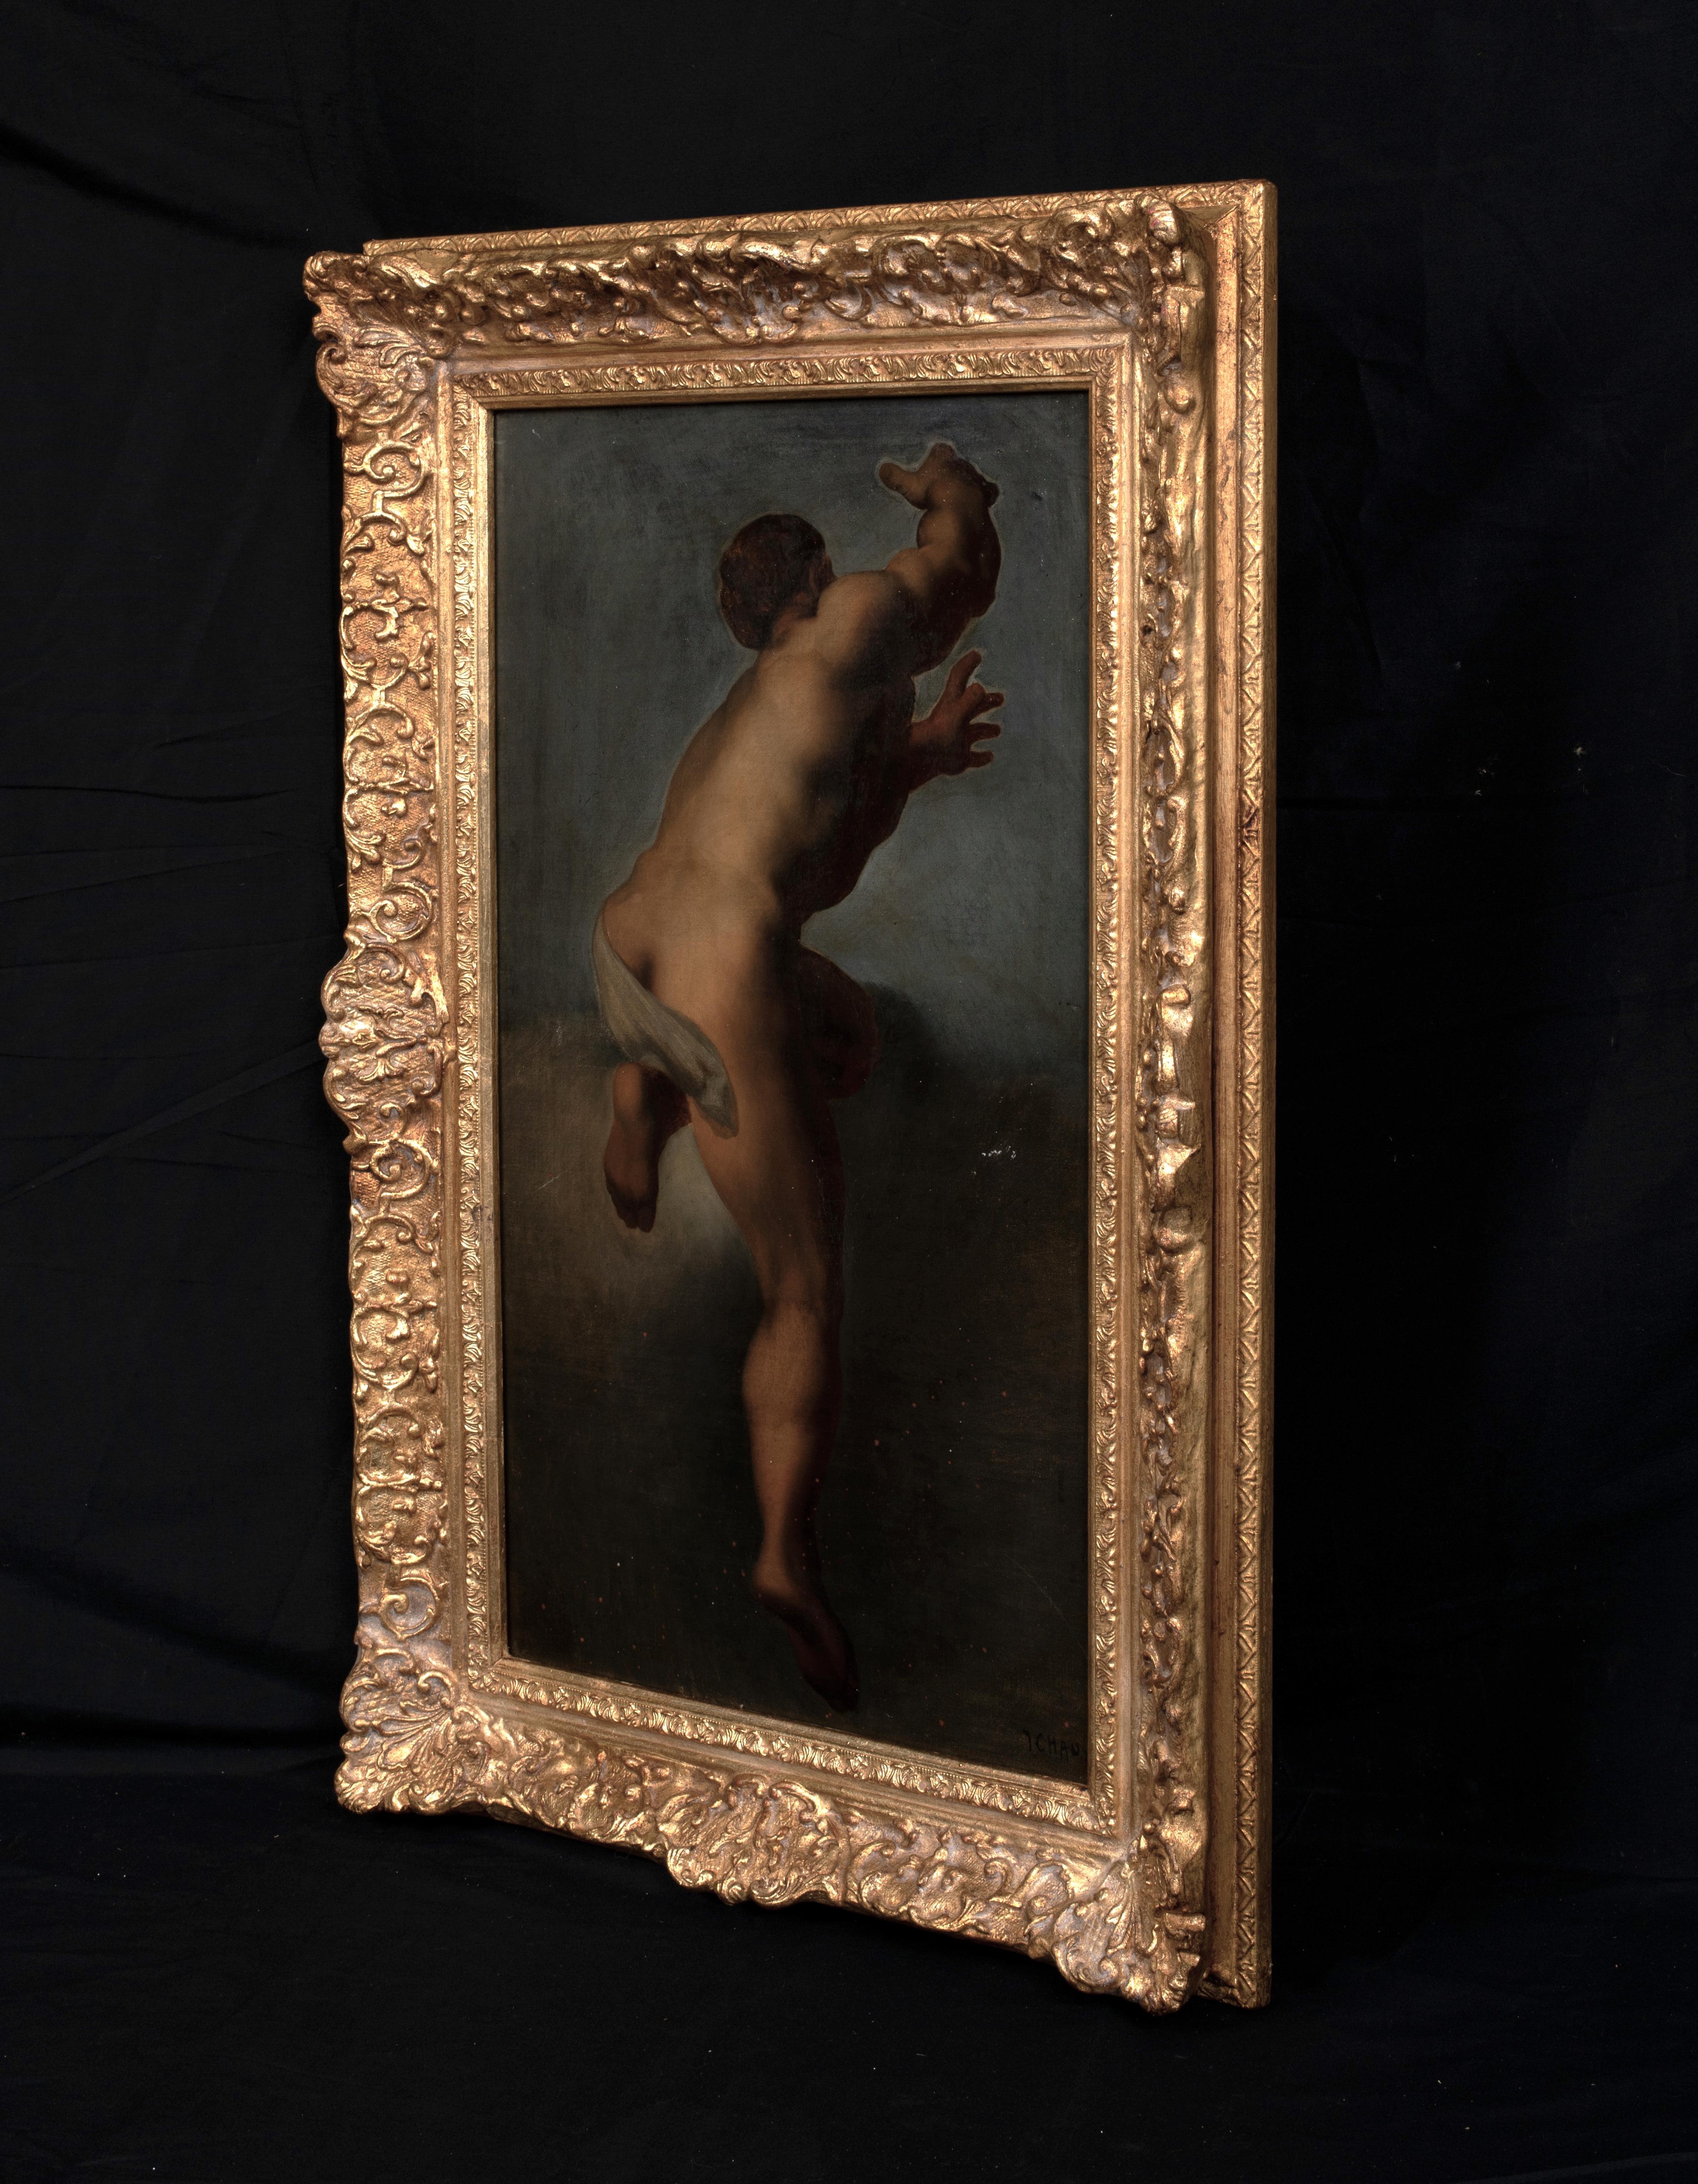 Hephaestus, 18th Century

French School

Huge 18th Century French Classical School depiction of Hephaestus the Greek God of Smoke & Fire, oil on canvas. Excellent quality and condition for its age depicted in reverse as an anatomical study of the